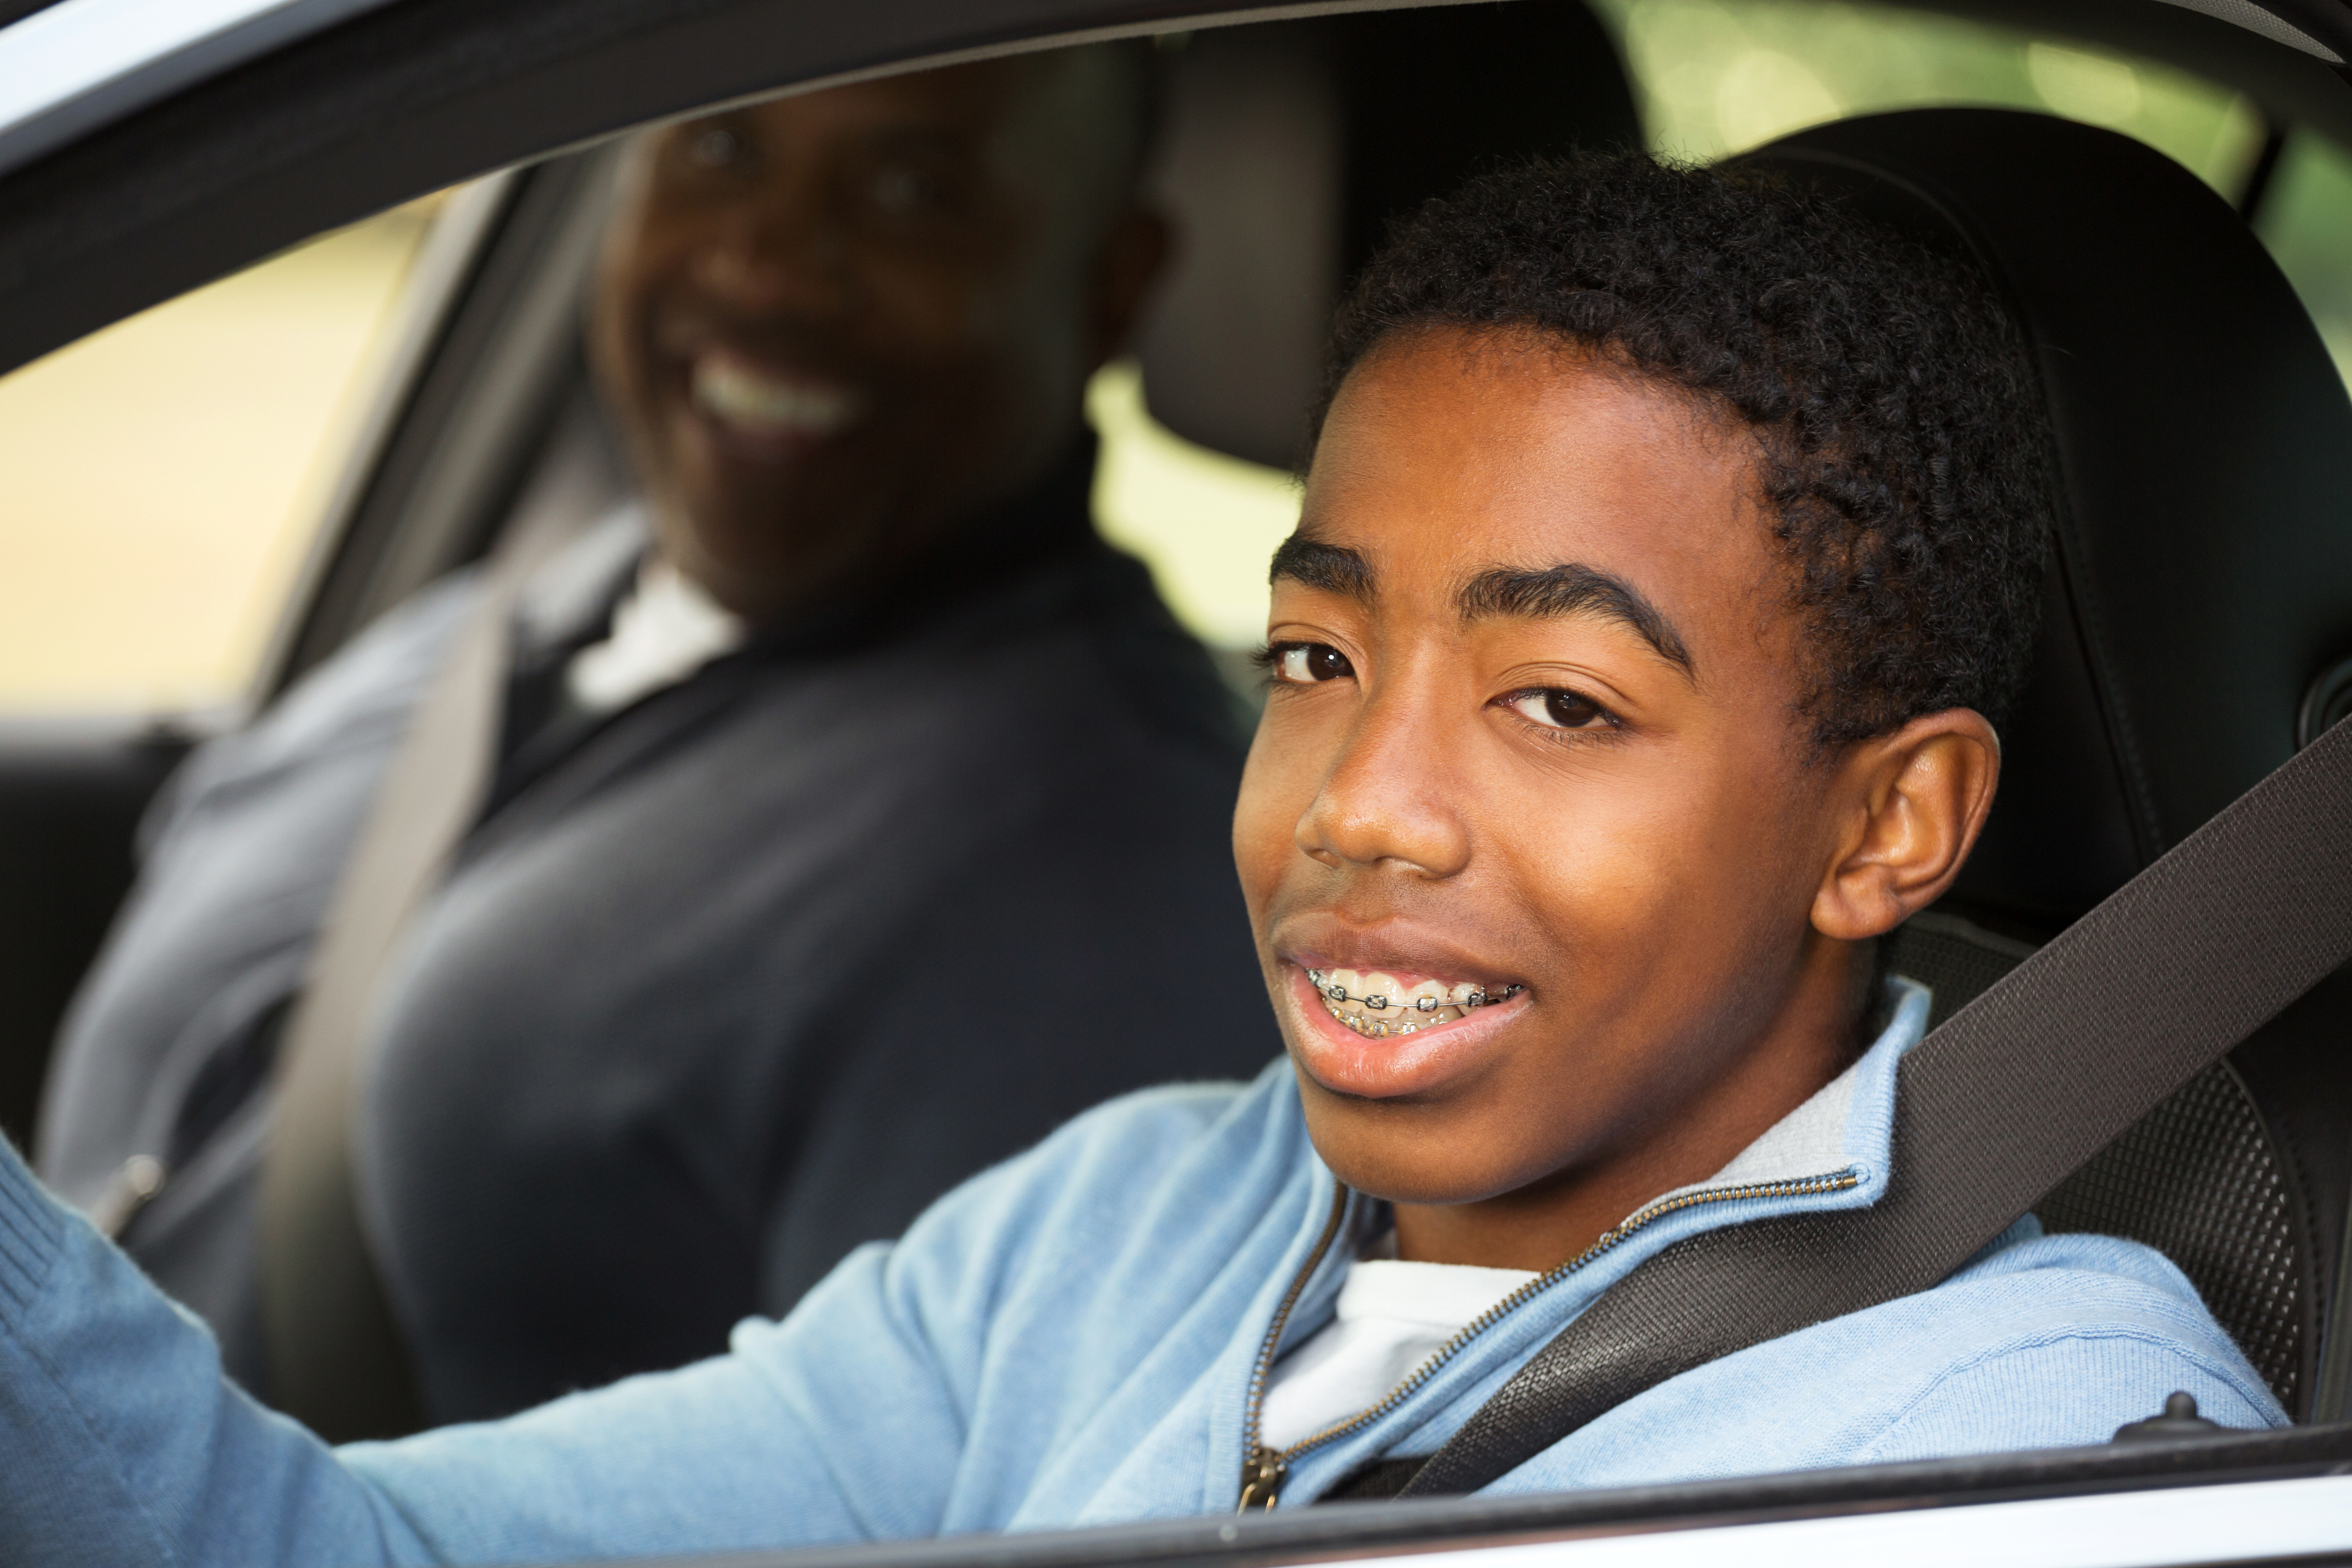 Tips For Teen Drivers When Driving With Friends